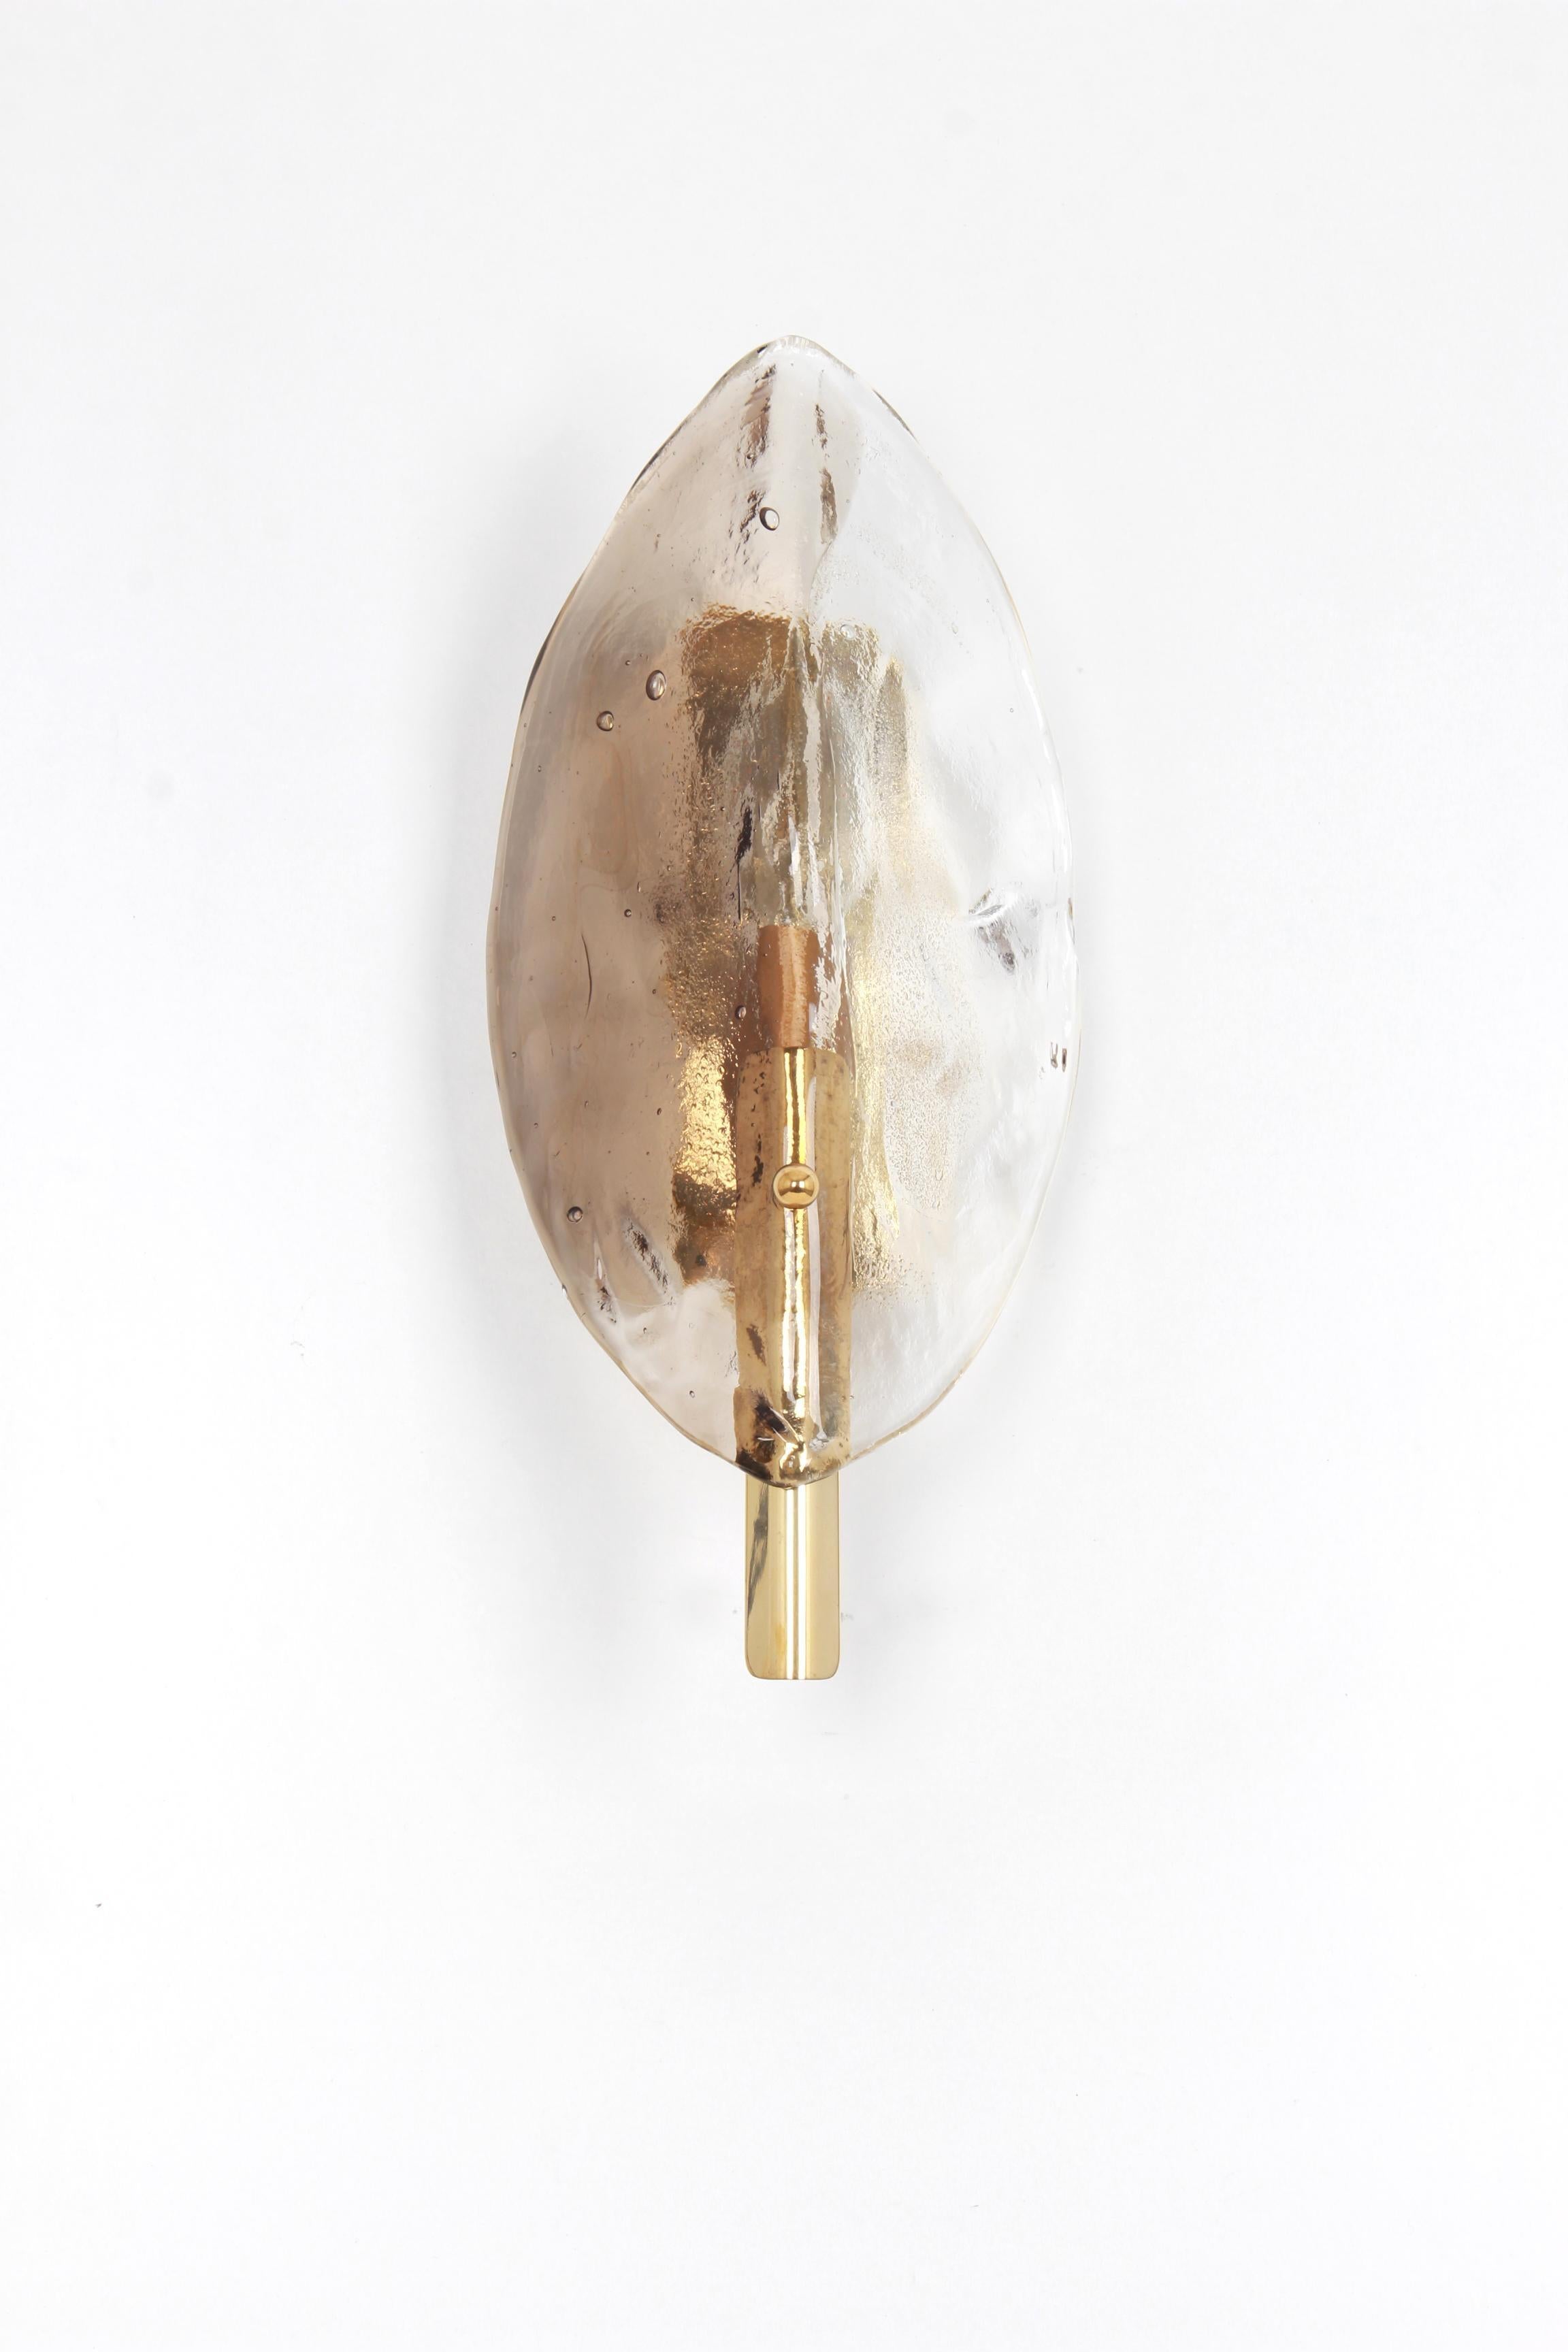 Wonderful mid-century wall sconce with handcrafted Smoked Murano glass piece on a brass base, made by J.T.Kalmar, Austria, manufactured, circa 1960-1969.
Model: Ficus

High quality and in very good condition. Cleaned, well-wired, and ready to